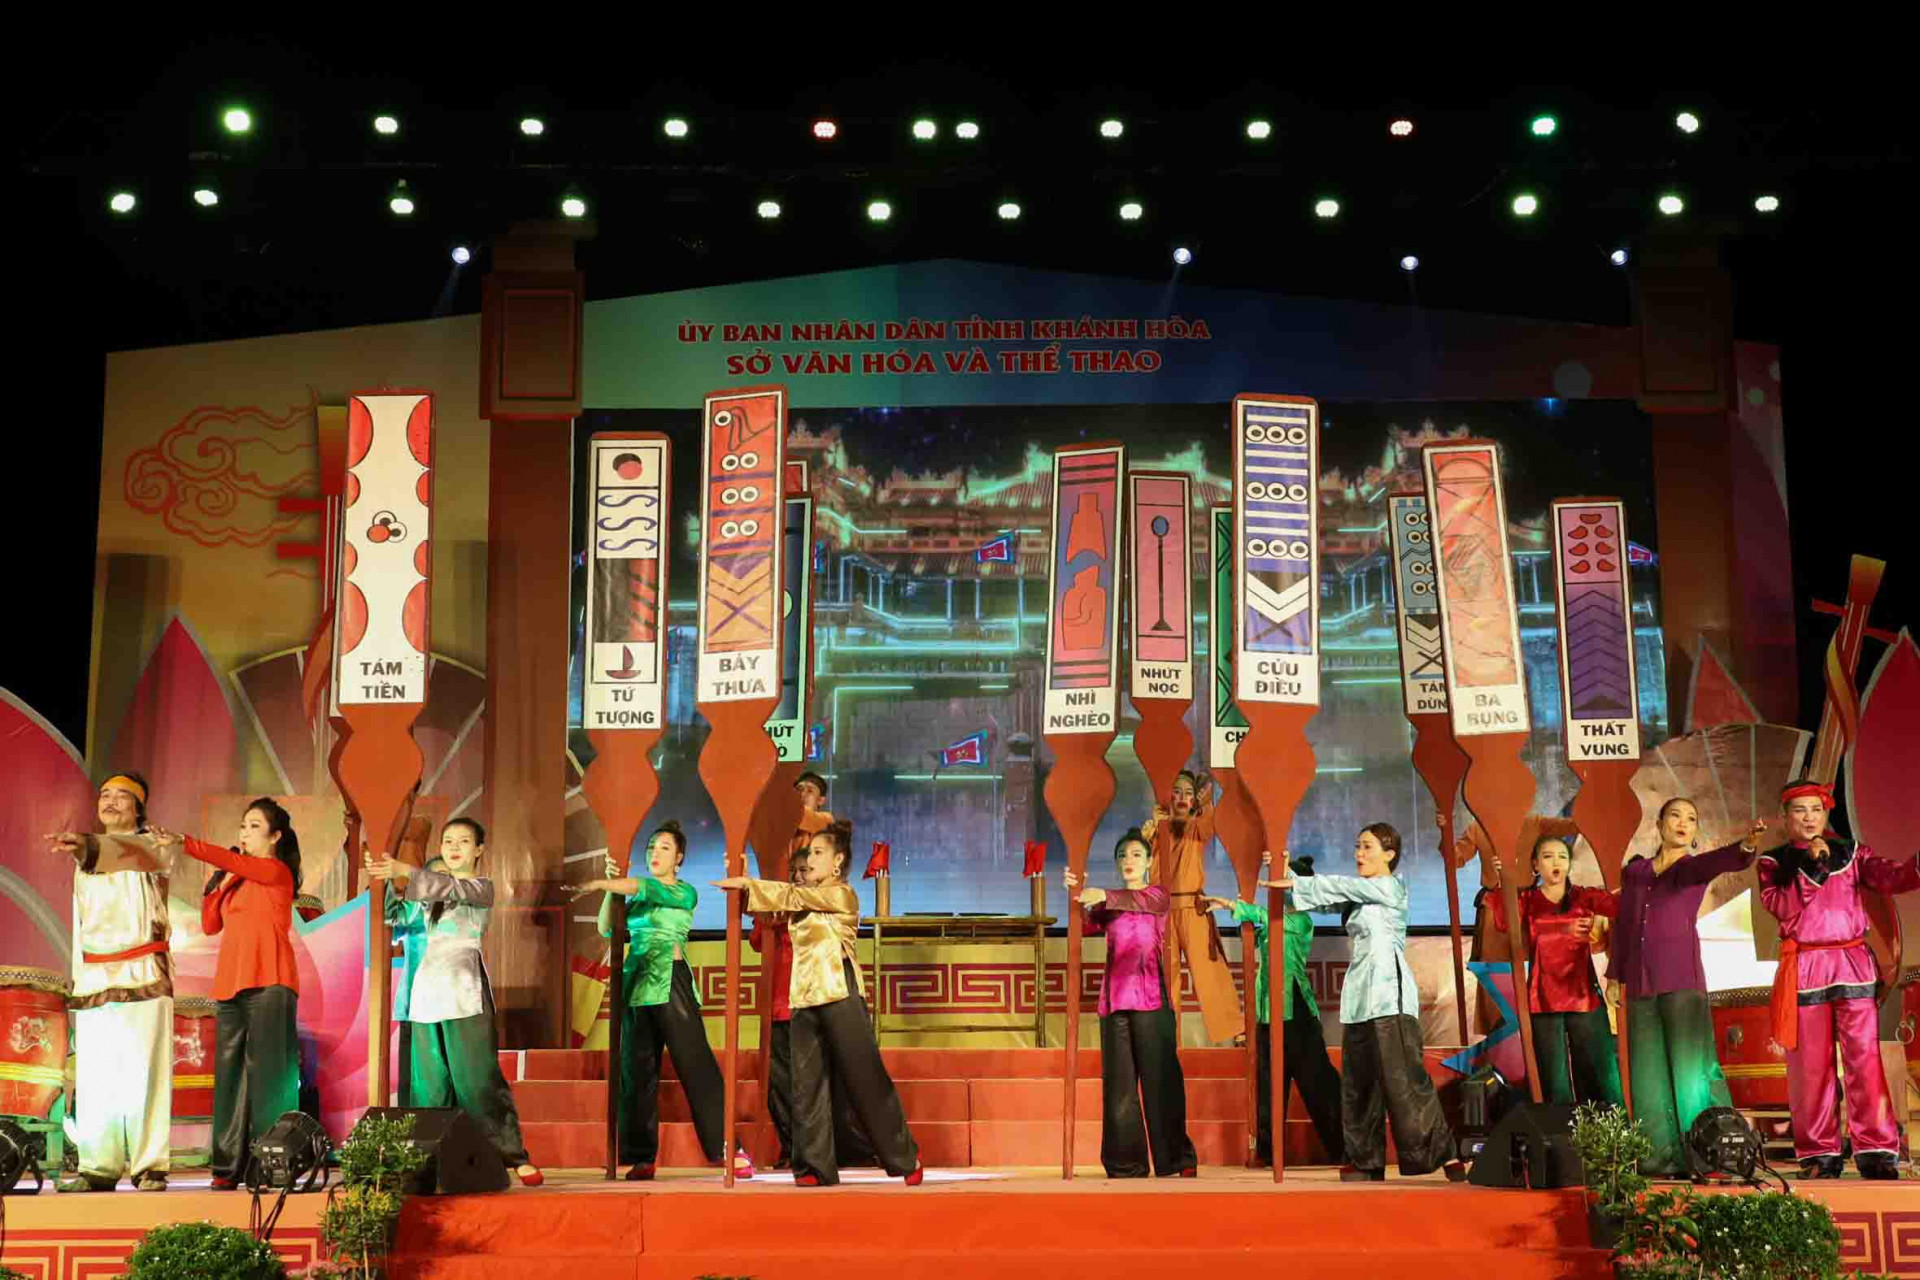 Performance of Khanh Hoa Provincial Traditional Art Theater opens the festival